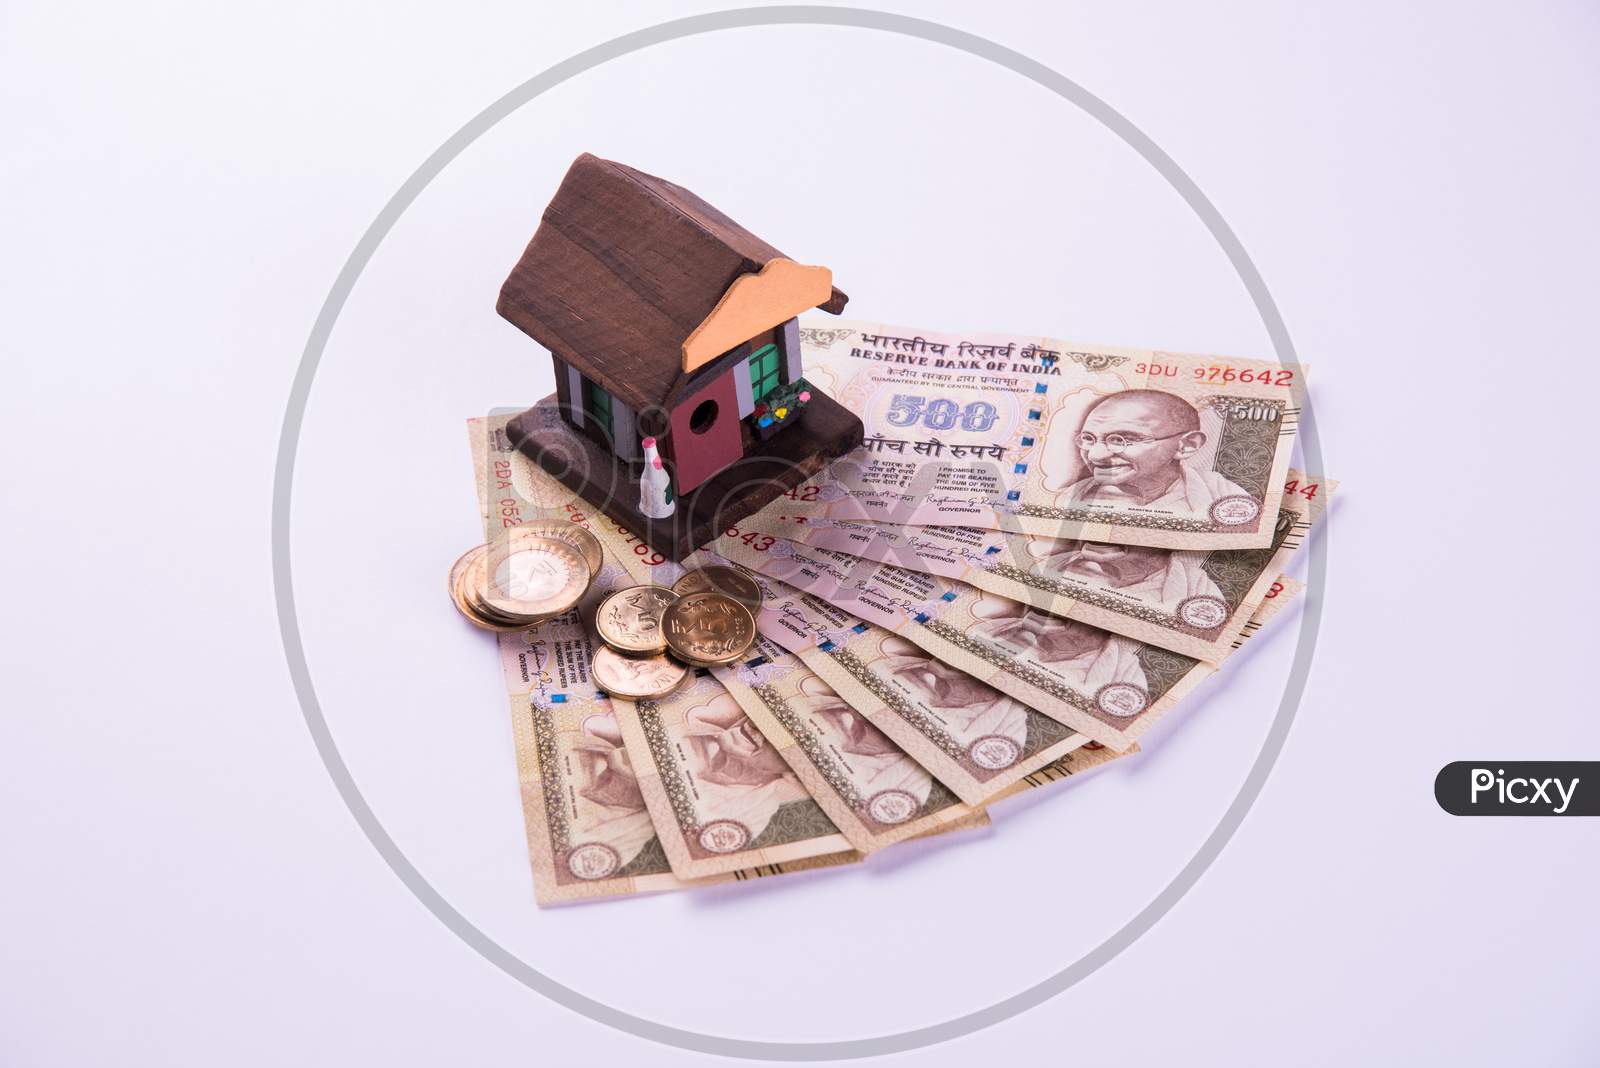 Indian Real Estate Finance and Housing Loan or buying concept showing Rupees, 3D house model, calculator etc